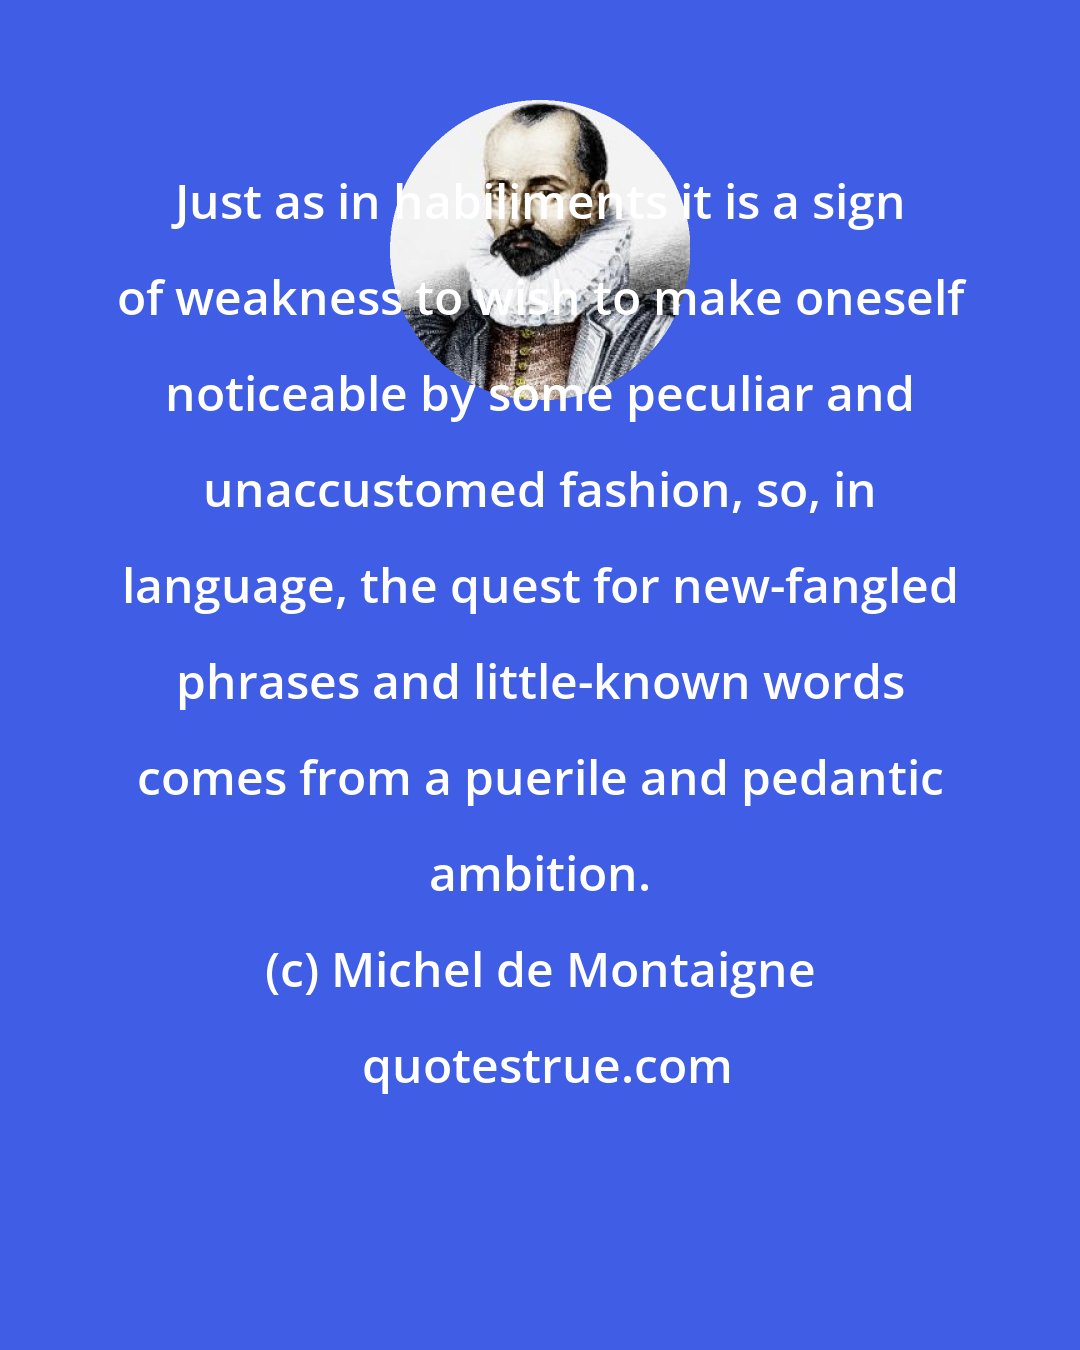 Michel de Montaigne: Just as in habiliments it is a sign of weakness to wish to make oneself noticeable by some peculiar and unaccustomed fashion, so, in language, the quest for new-fangled phrases and little-known words comes from a puerile and pedantic ambition.